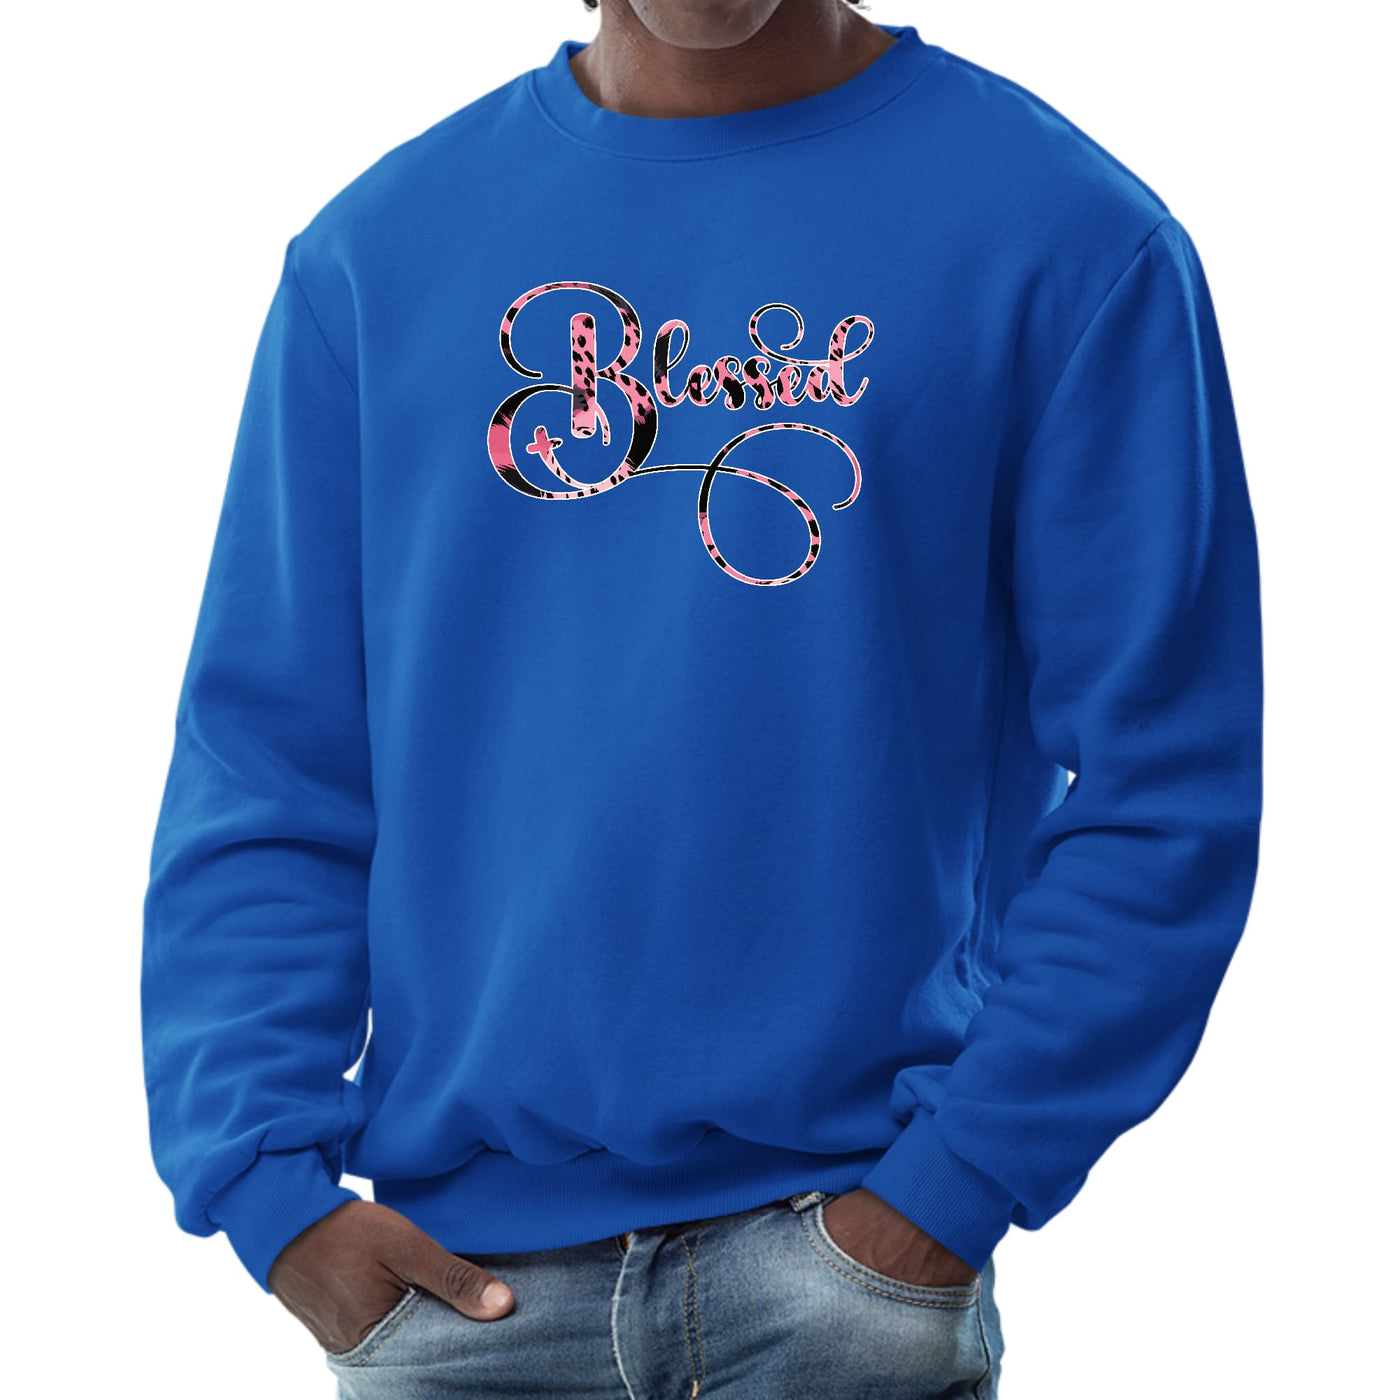 Mens Long Sleeve Graphic Sweatshirt Blessed Pink And Black Patterned - Mens